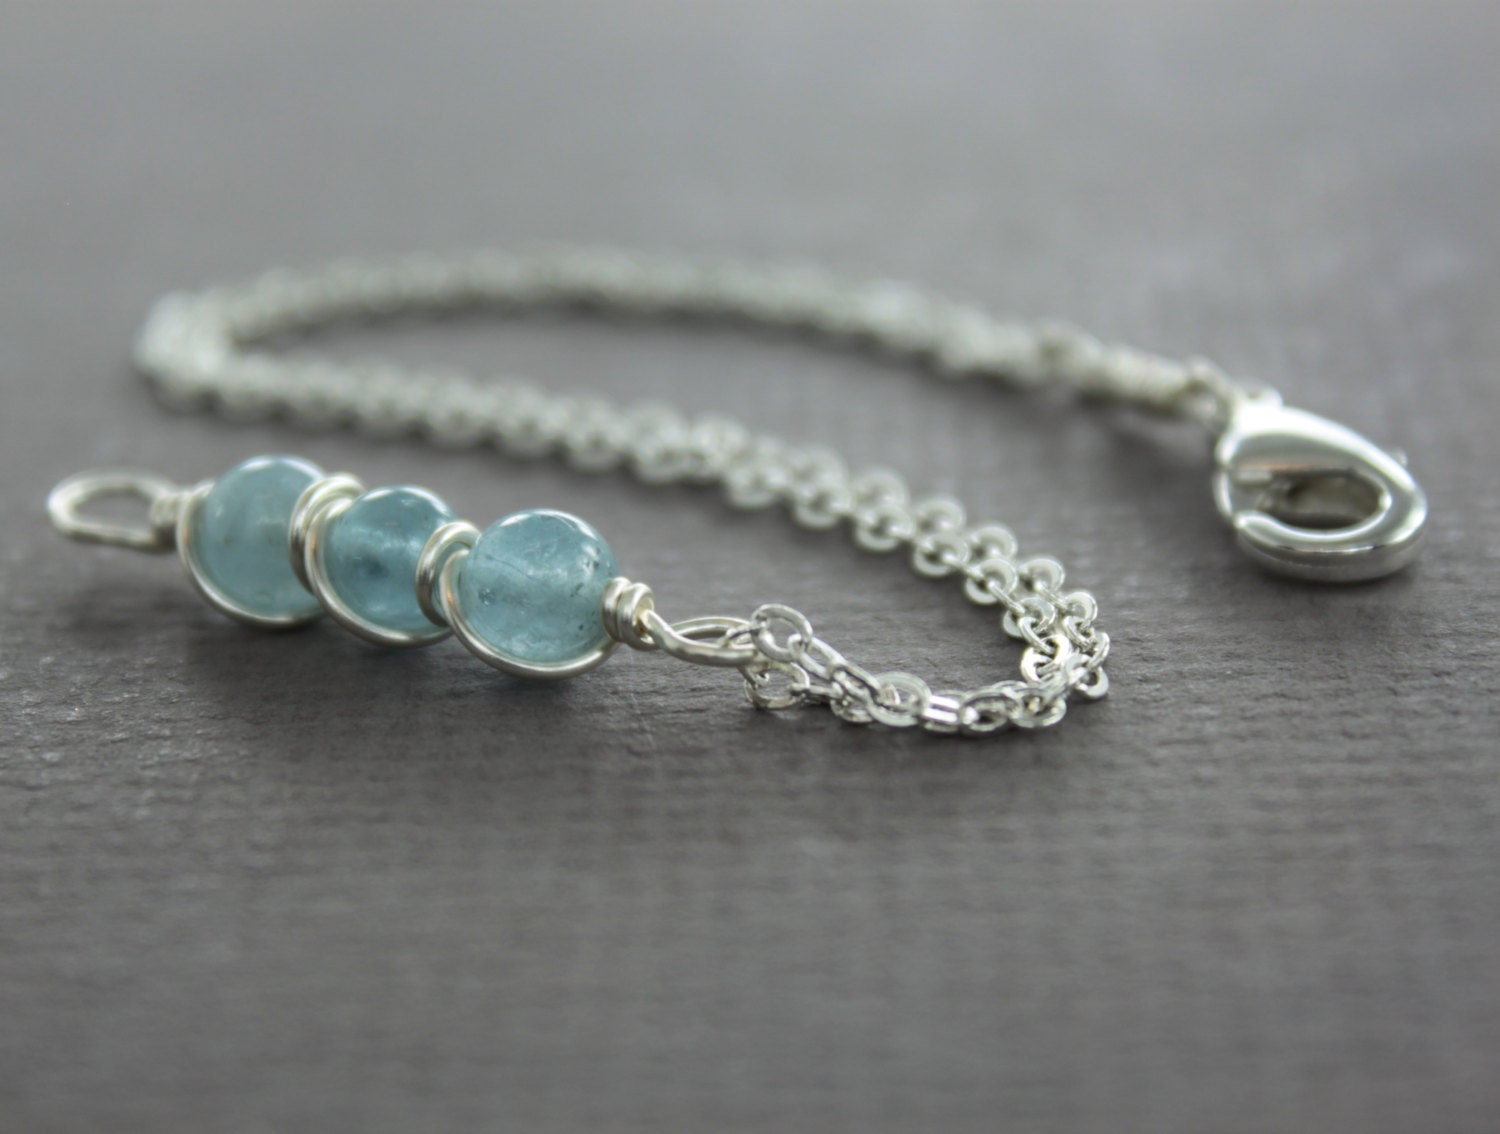 Dainty Sterling Silver Bracelet With Aquamarine Stones Chain - Etsy